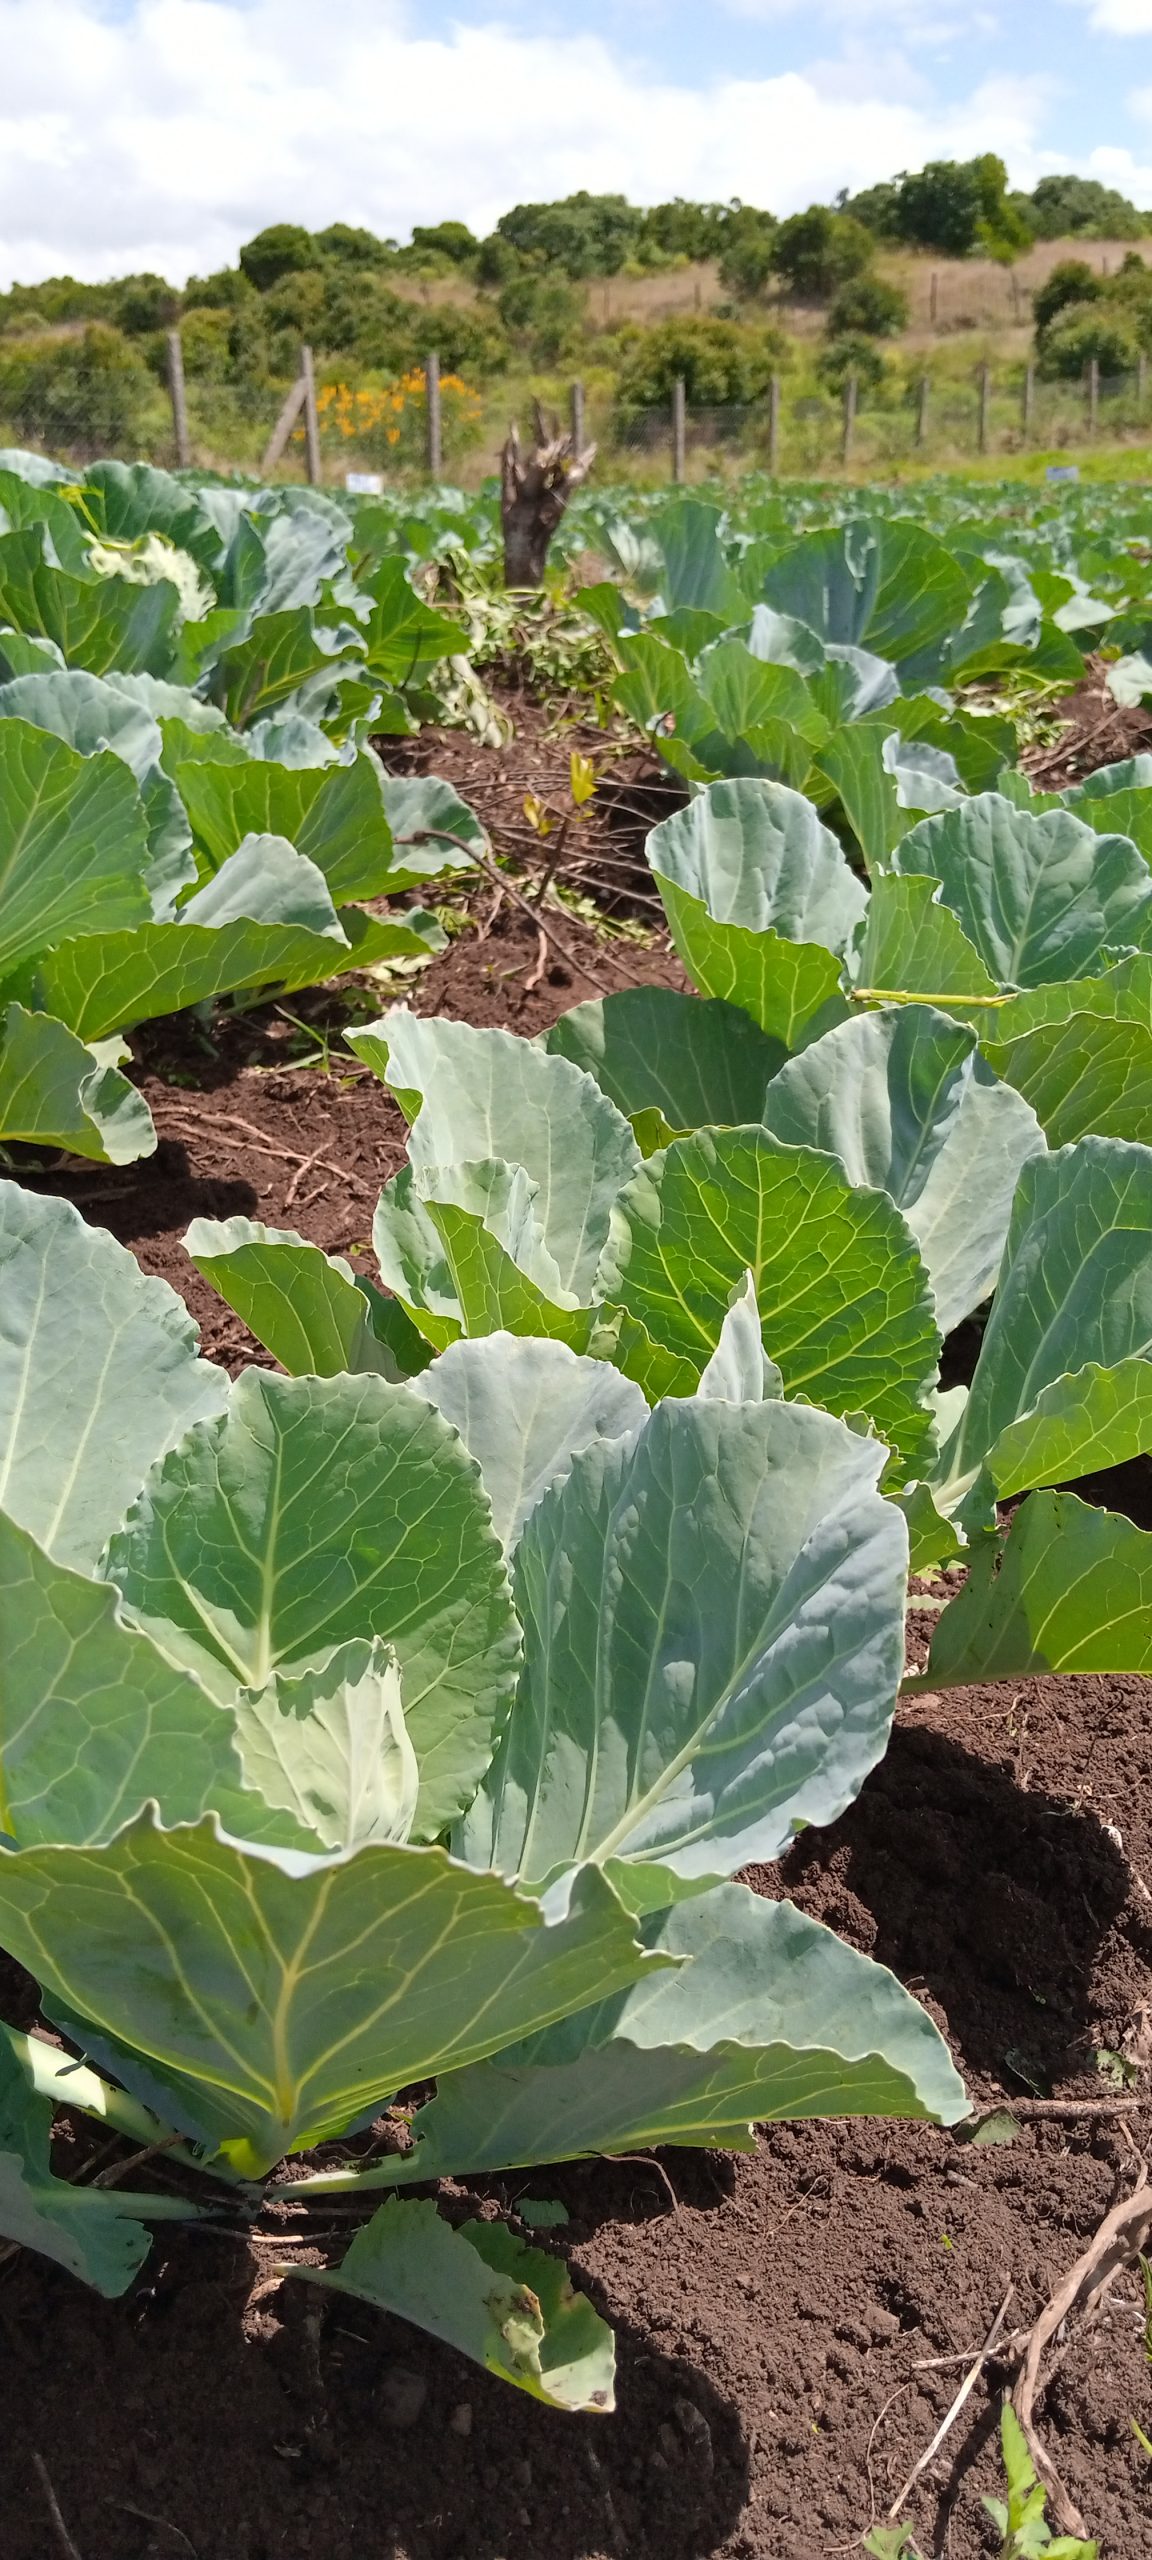 Cabbage farming in Kenya and it’s economic potential